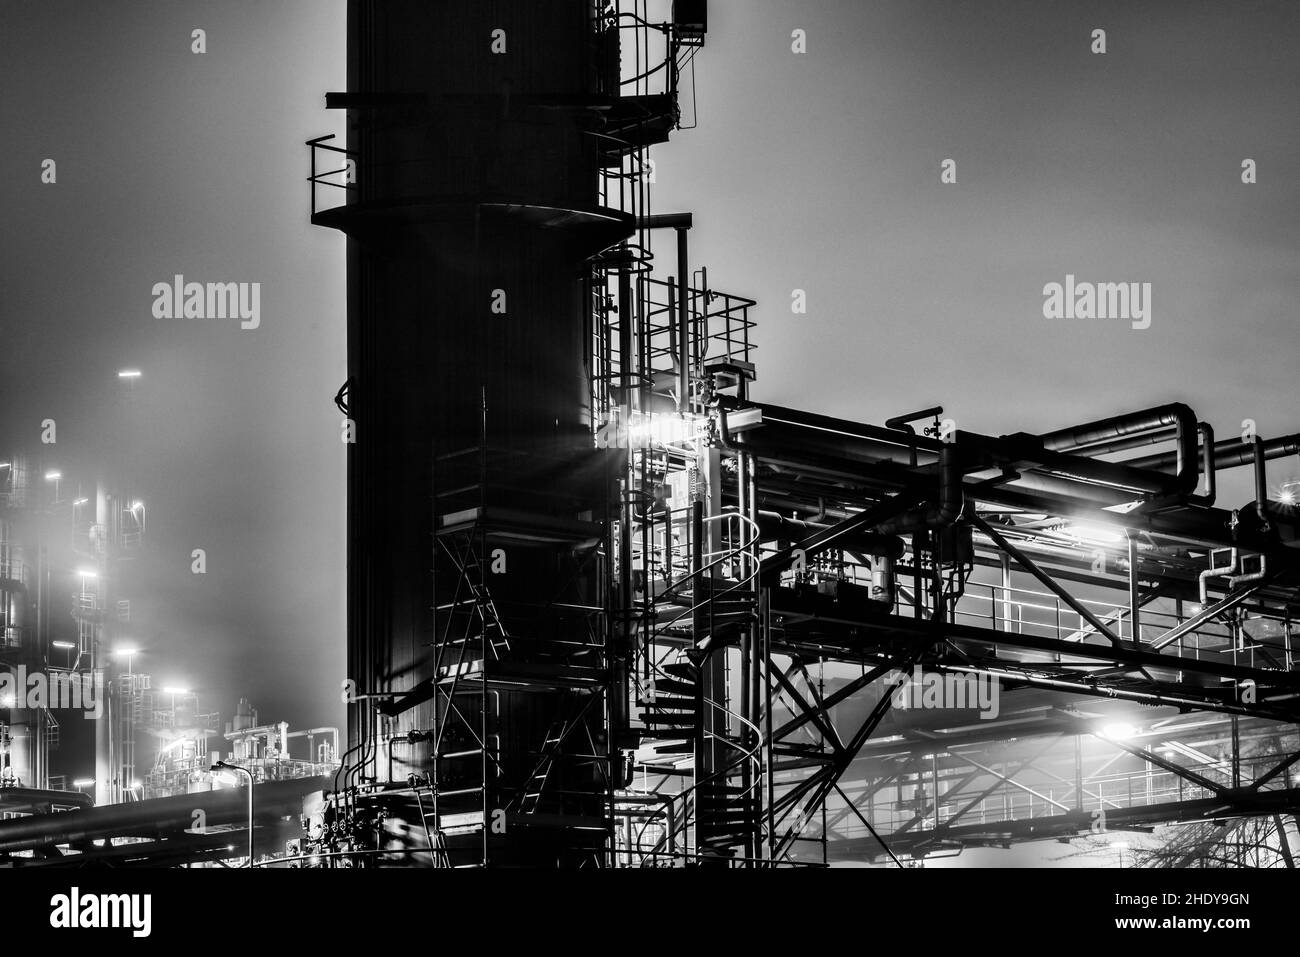 industry, industrial plant, chemical industry, industries, industrial plants, chemical industries Stock Photo